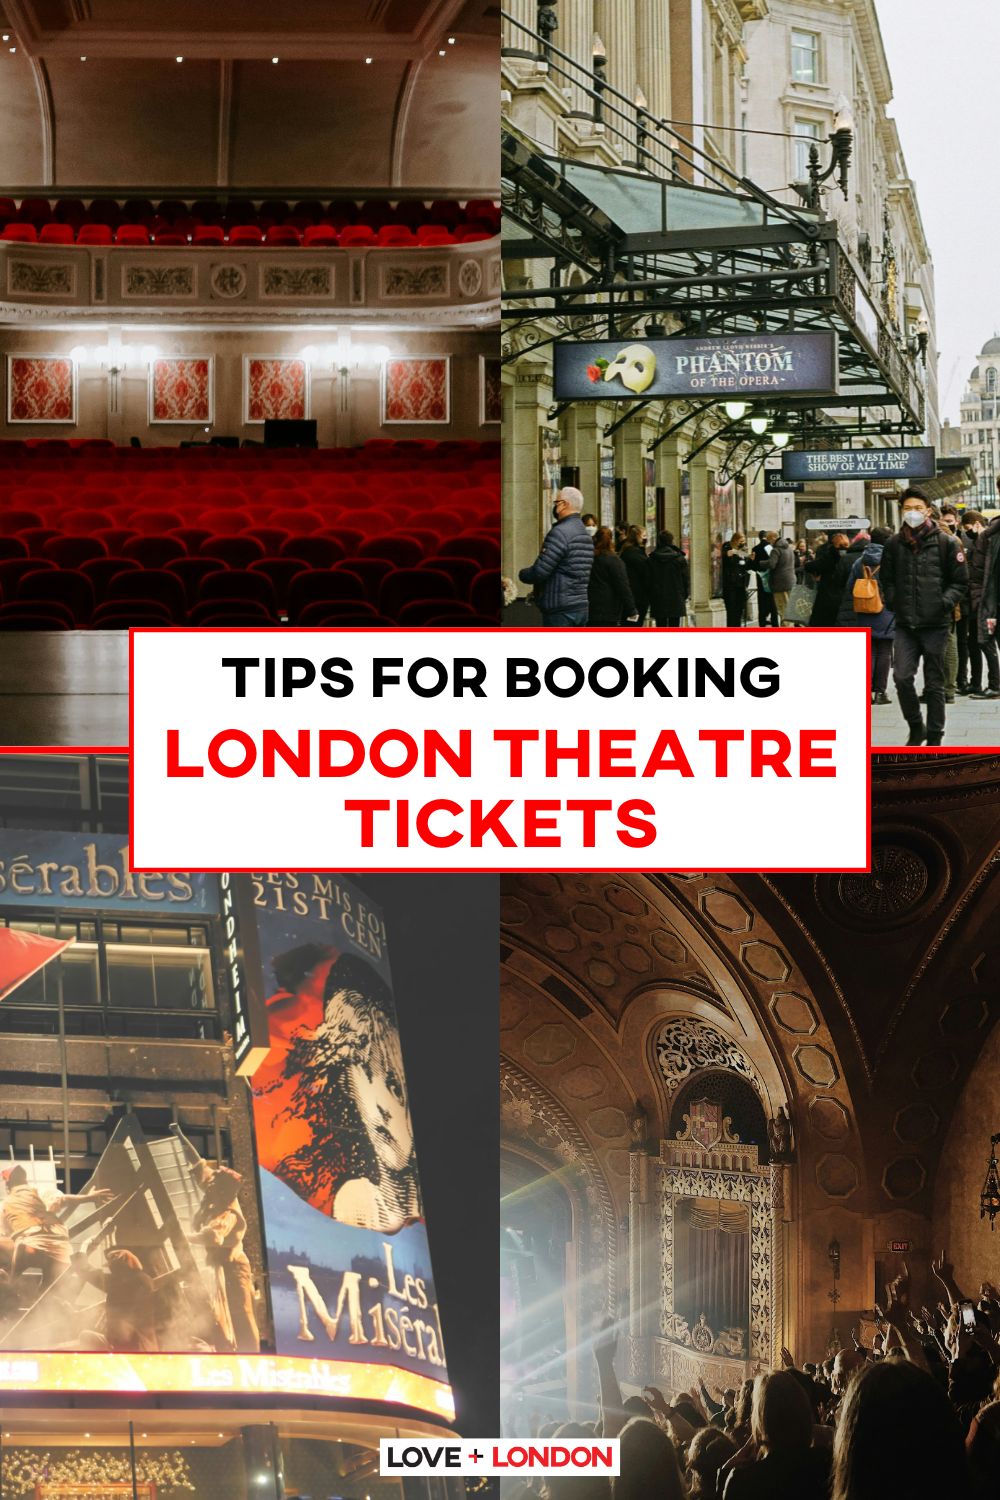 This is a Pinterest pin that details the things to know before booking London theatre tickets.